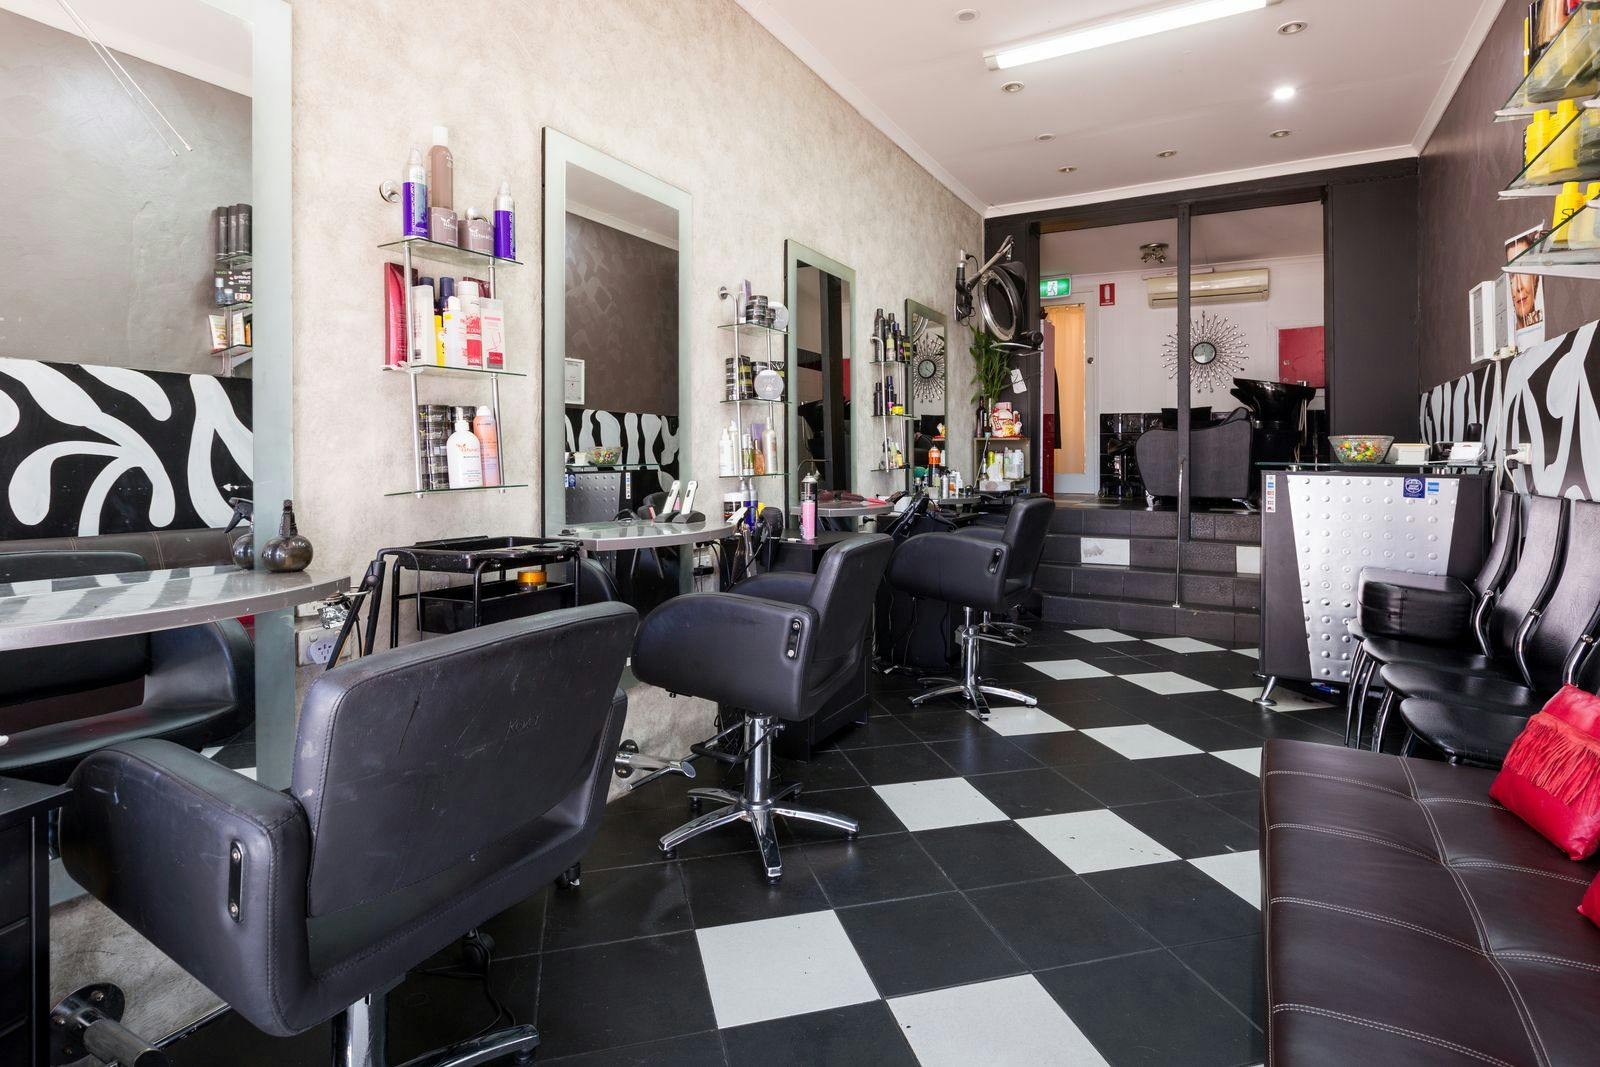 Top 20 Hair Extension Salons in Sydney | Bookwell